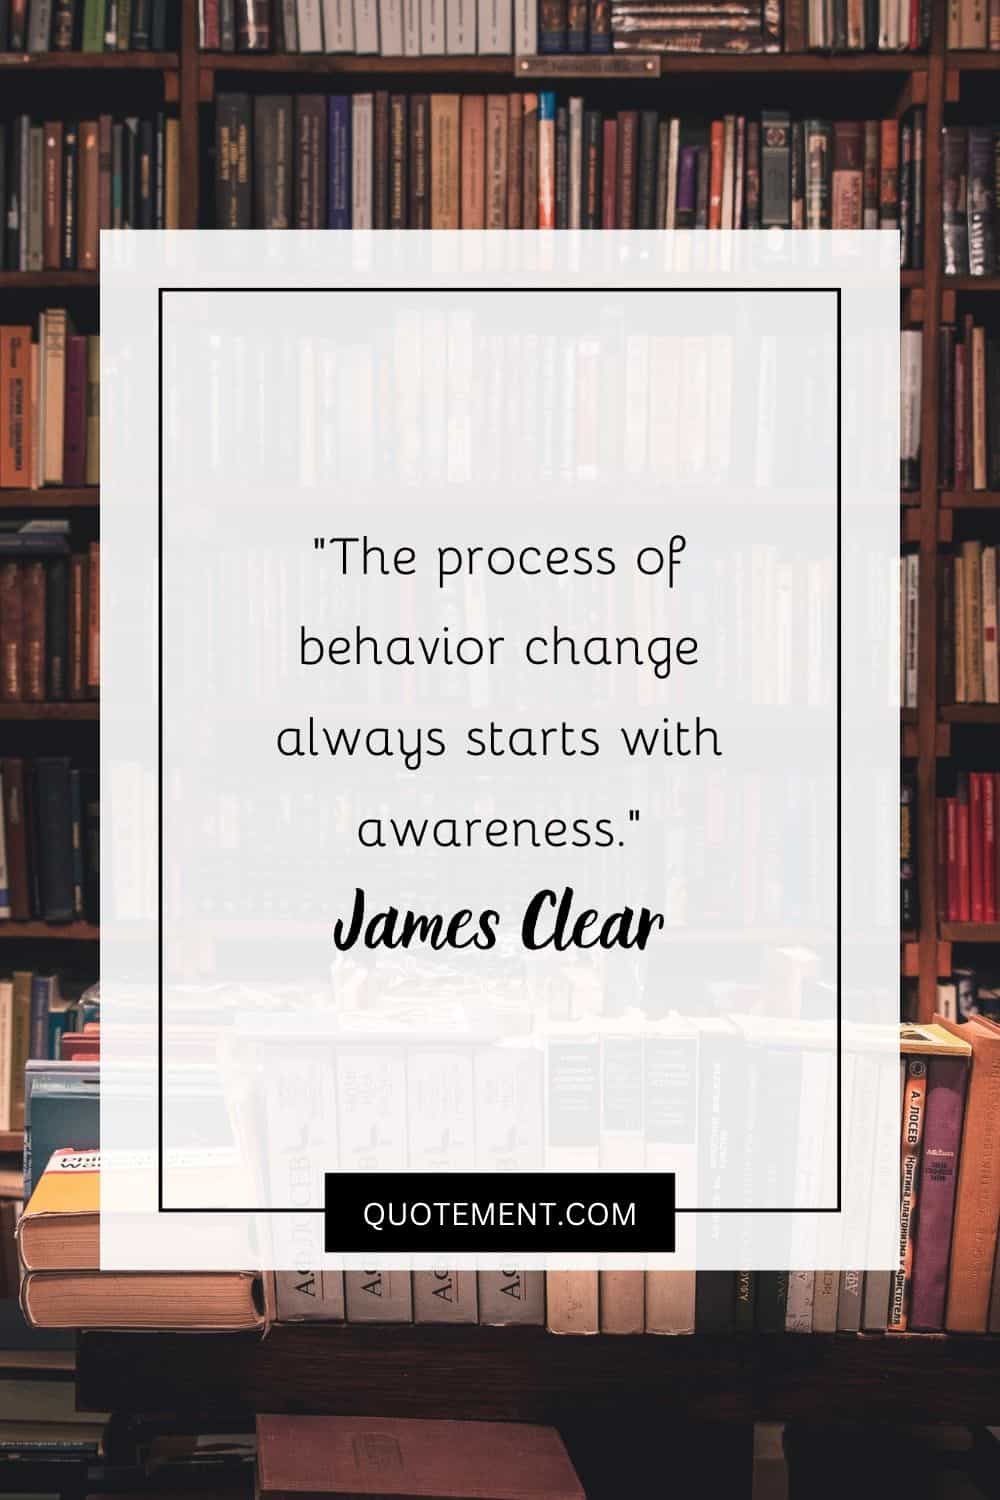 The process of behavior change always starts with awareness.